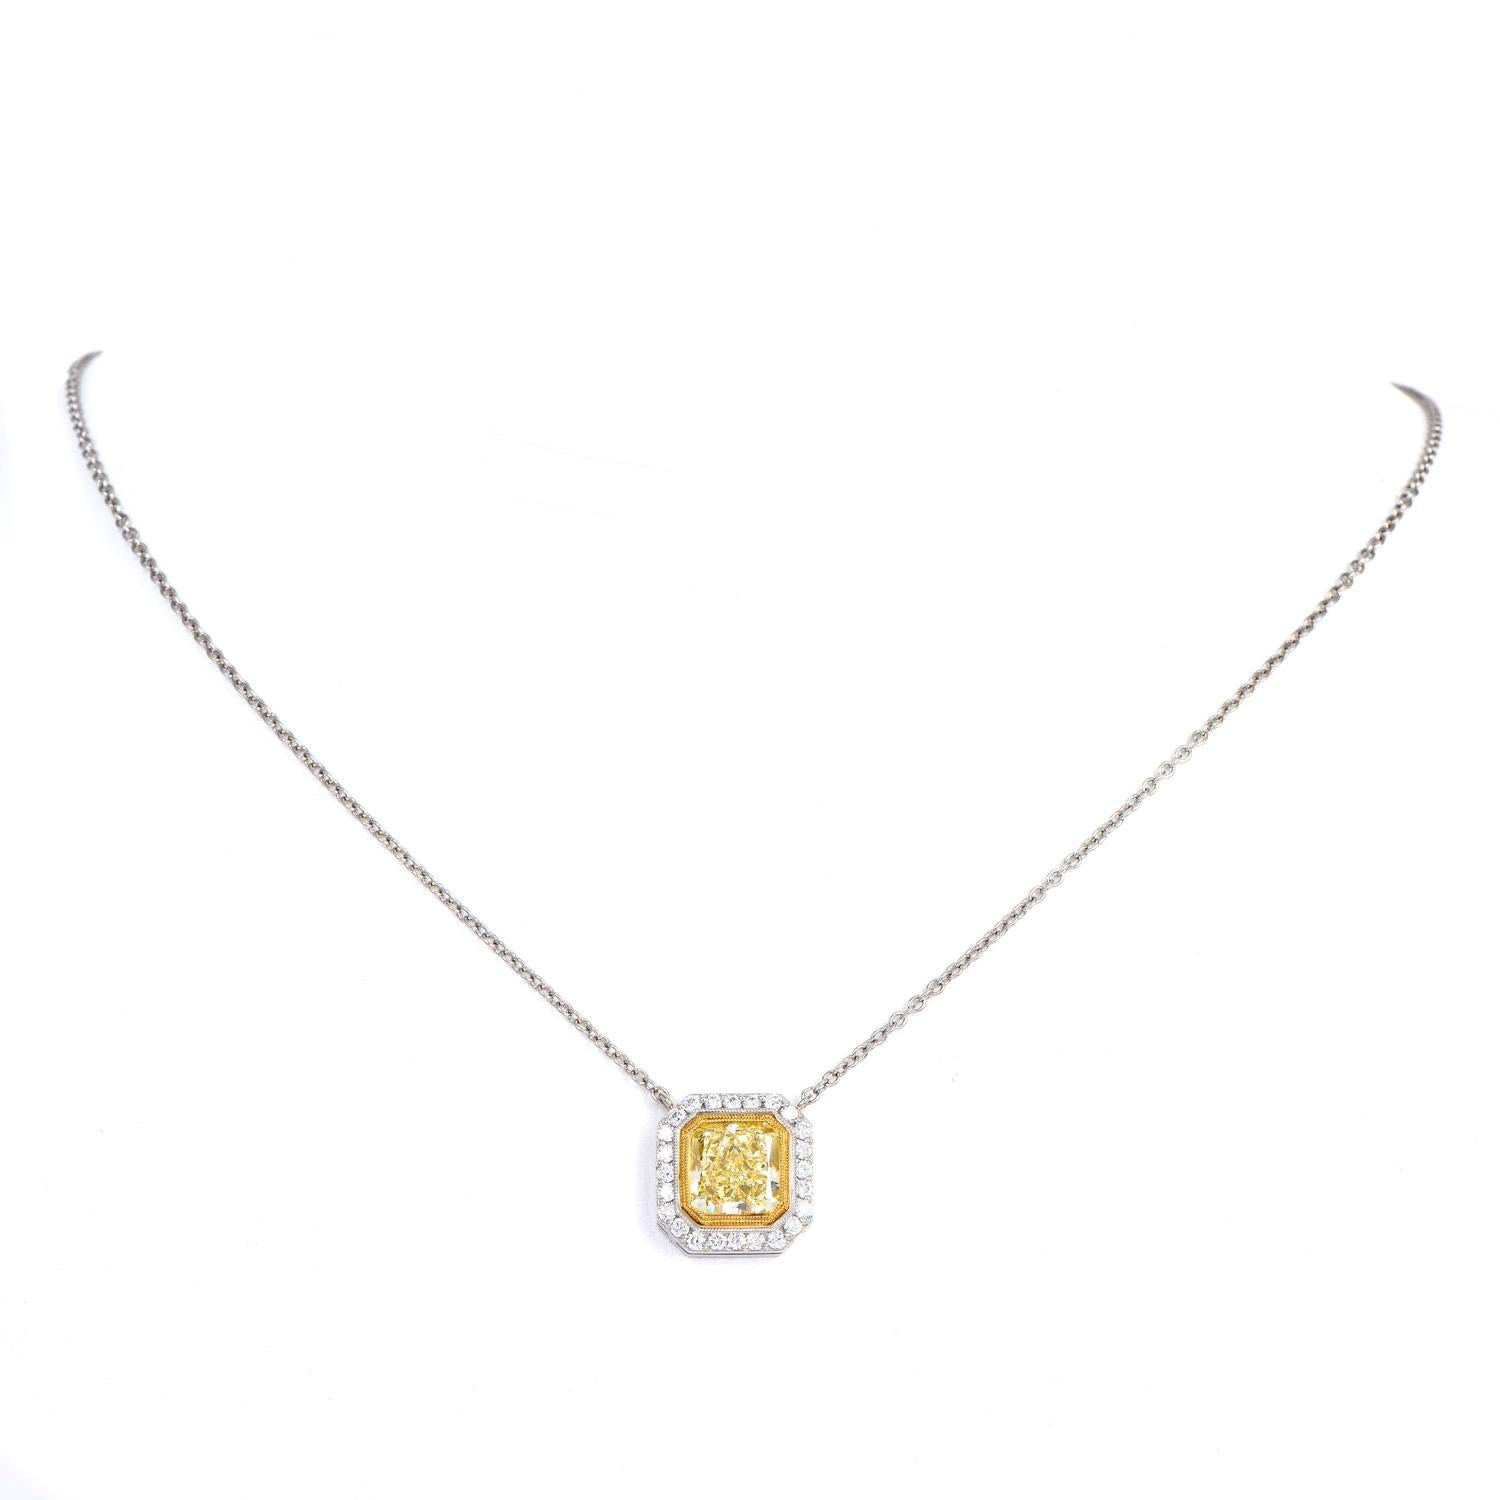 This luxurious yellow diamond cushion-shaped pendant link chain necklace brings the classic look to a new level. 

Crafted in Platinum with 18K yellow gold accents. 

Featuring a vibrant fancy yellow Natural Diamond in the center, creating a